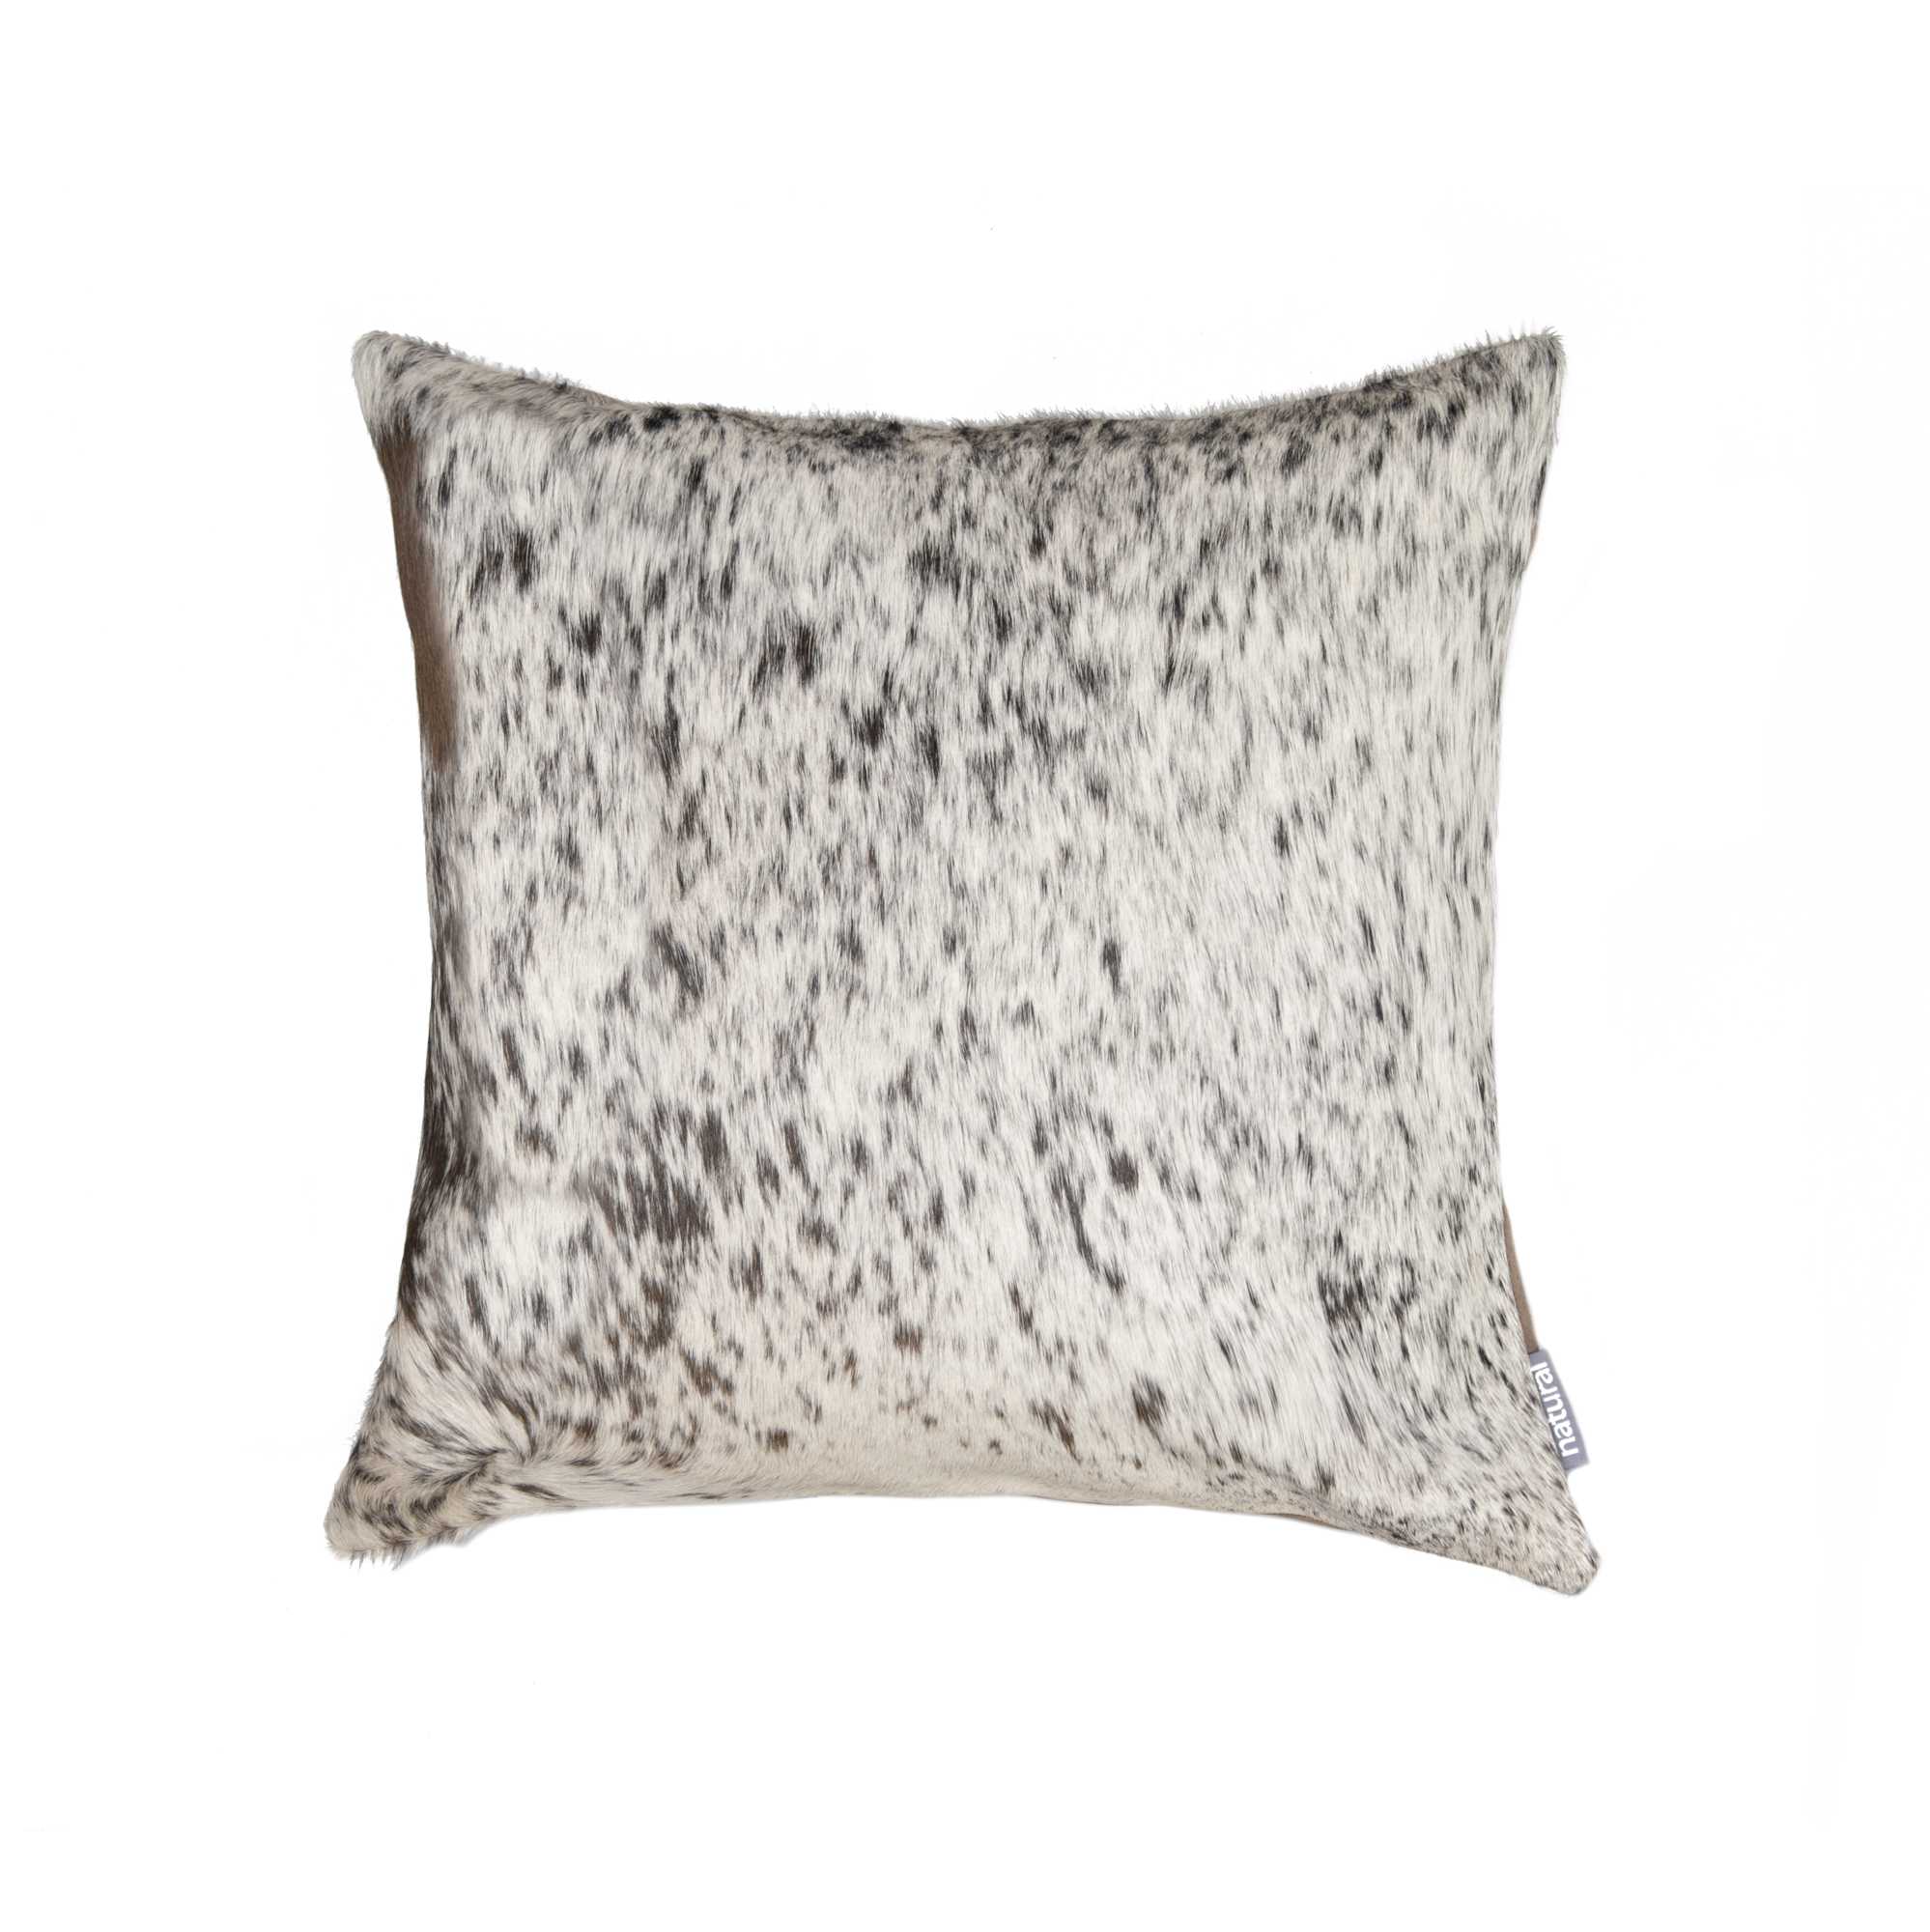 18" x 18" x 5" Salt And Pepper Gray And White Cowhide - Pillow